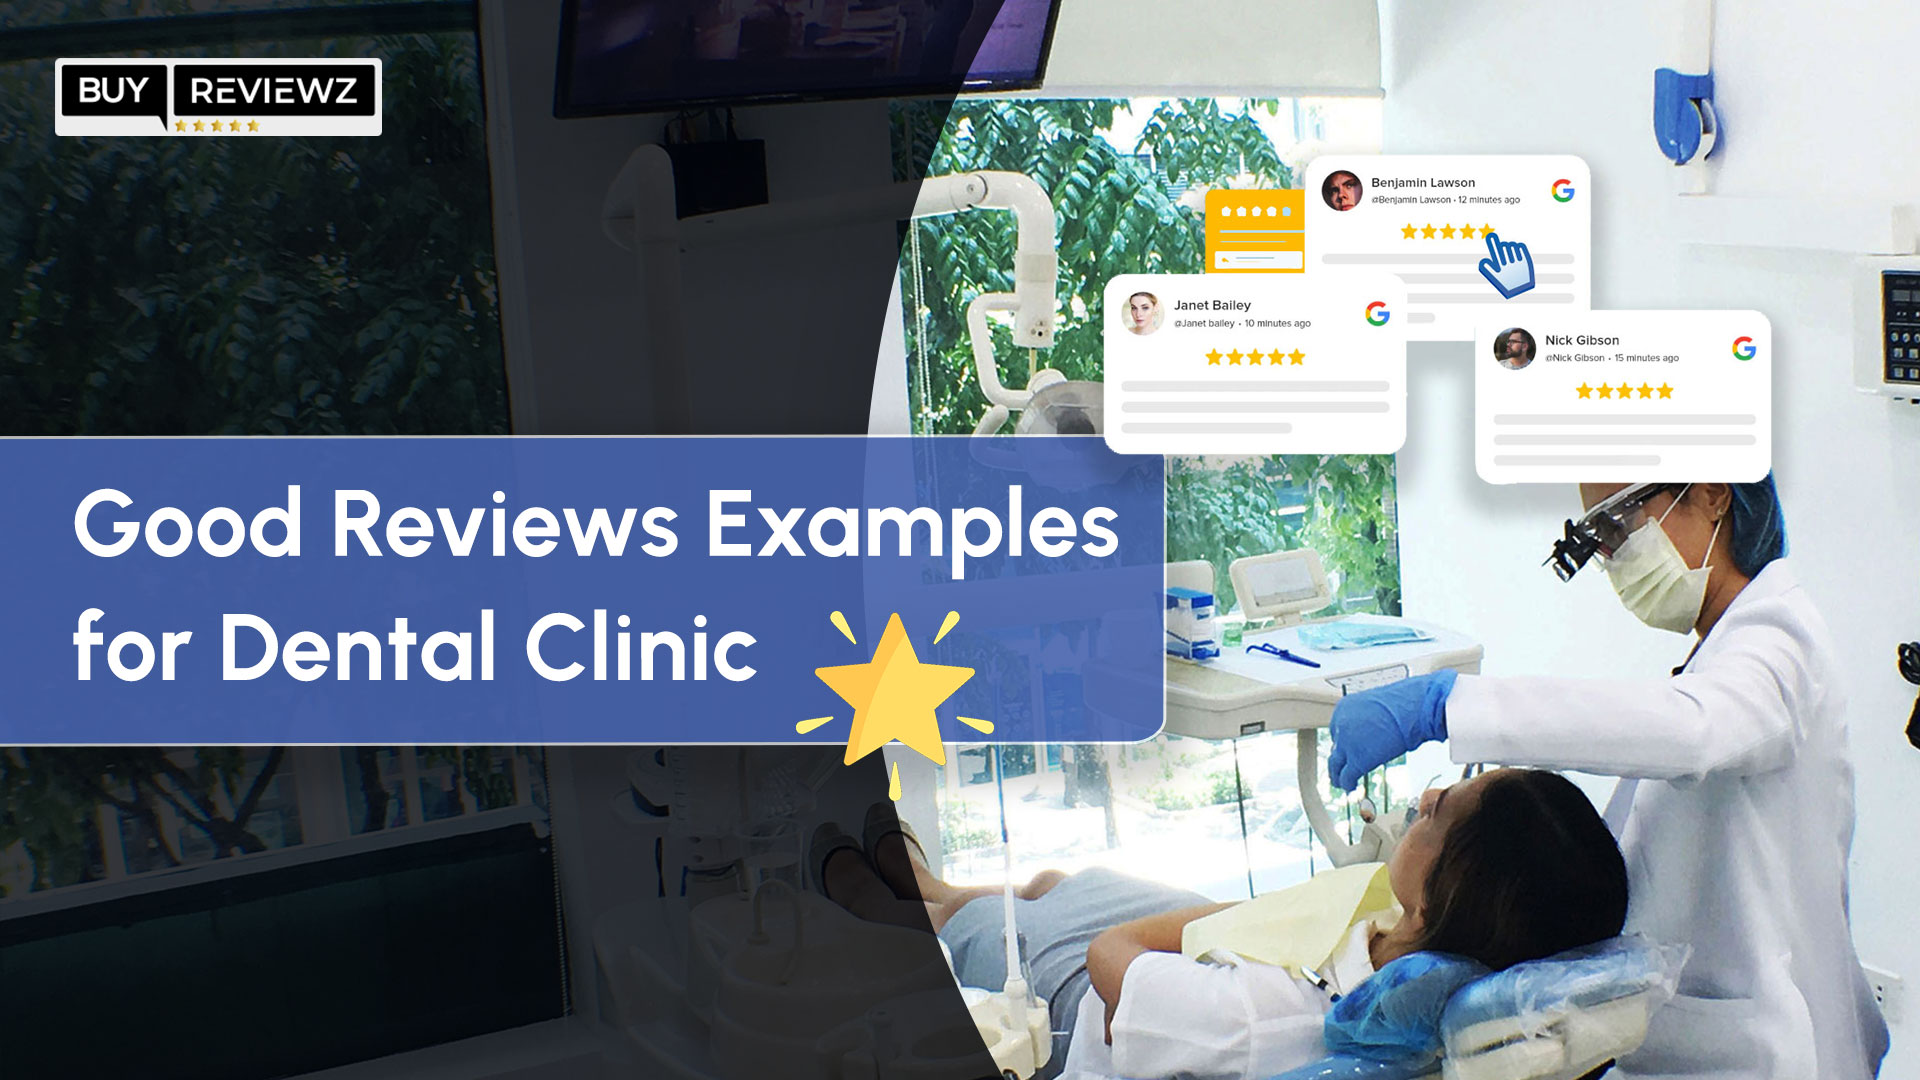 Good Reviews Examples for Dental Clinic